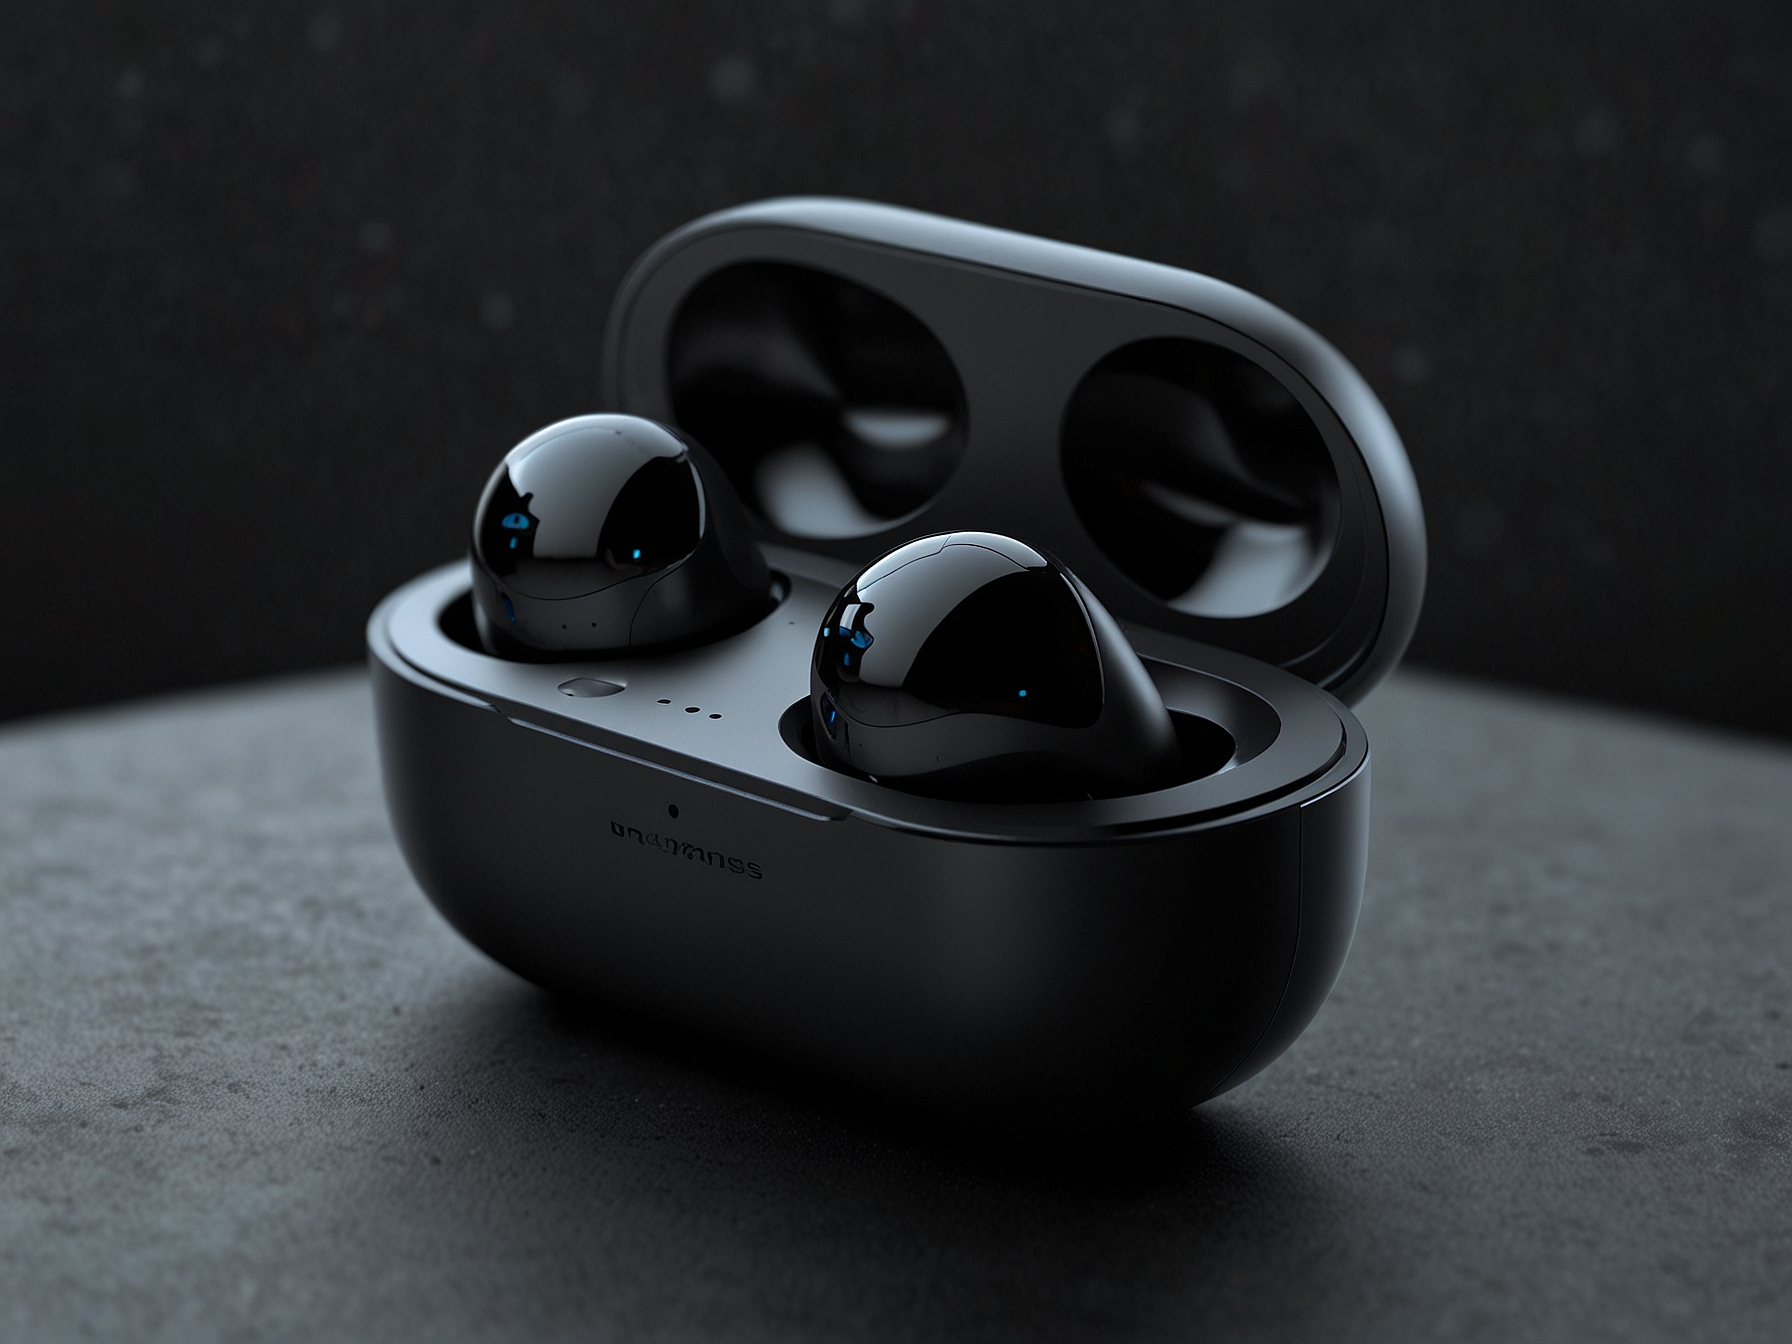 The second image illustrates the AirPods-like stem design of the Galaxy Buds 3, emphasizing the ergonomic fit and proximity of the microphone for improved call quality.